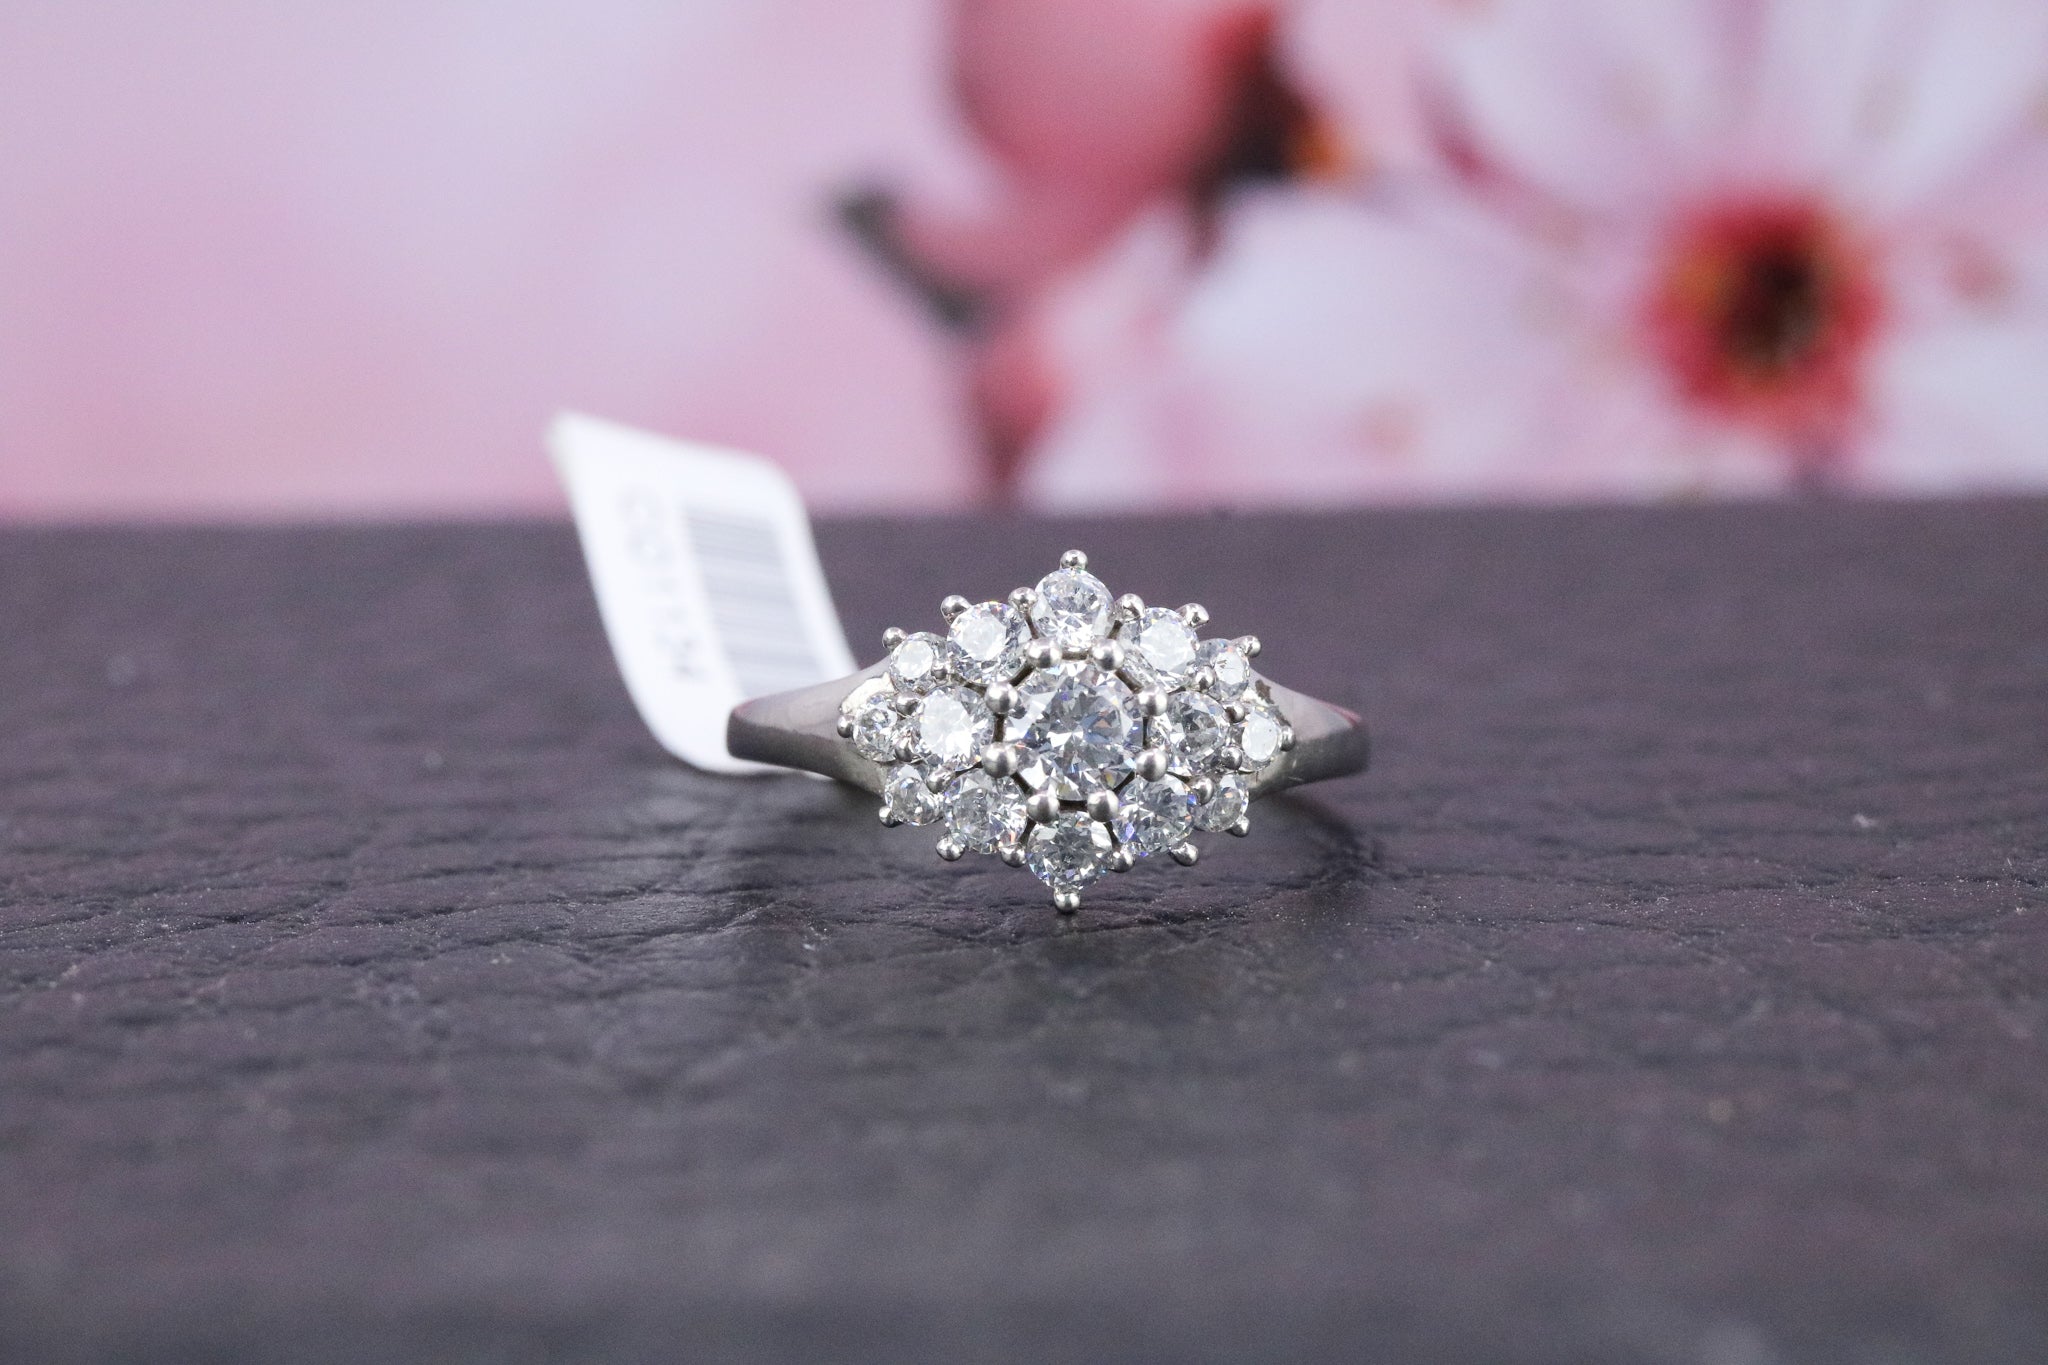 9ct White Gold Cluster Ring - CO1134 - Hallmark Jewellers Formby & The Jewellers Bench Widnes